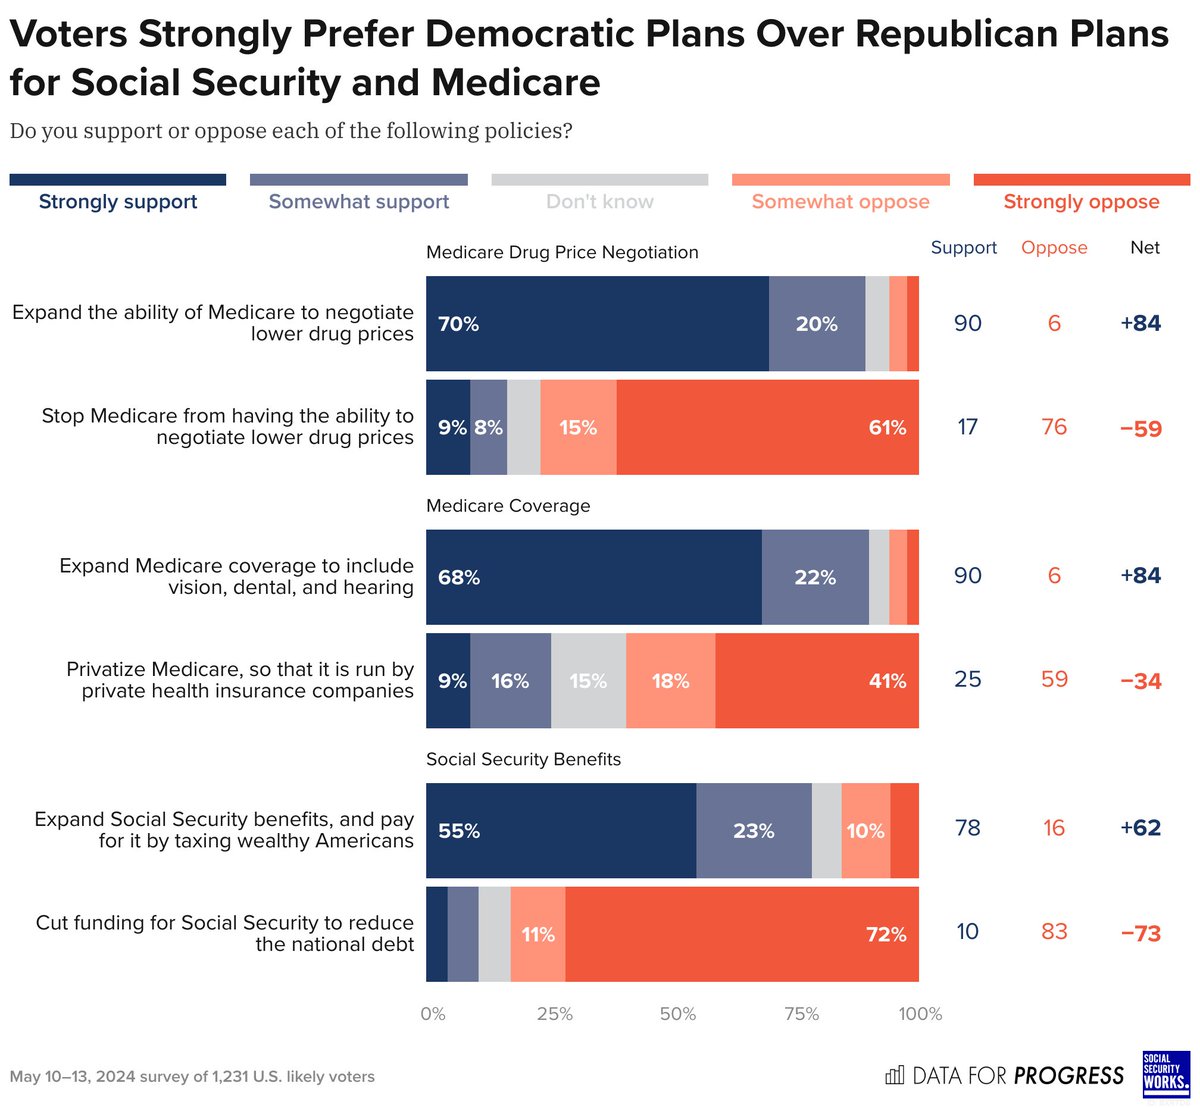 NEW POLL w/ @SSWorks: Voters strongly prefer Democratic plans on Social Security & Medicare over Republican ones. Expanding Medicare's ability to negotiate drug prices and covering vision, dental, & hearing under Medicare are supported by 90% of voters. dataforprogress.org/datasets/polli…